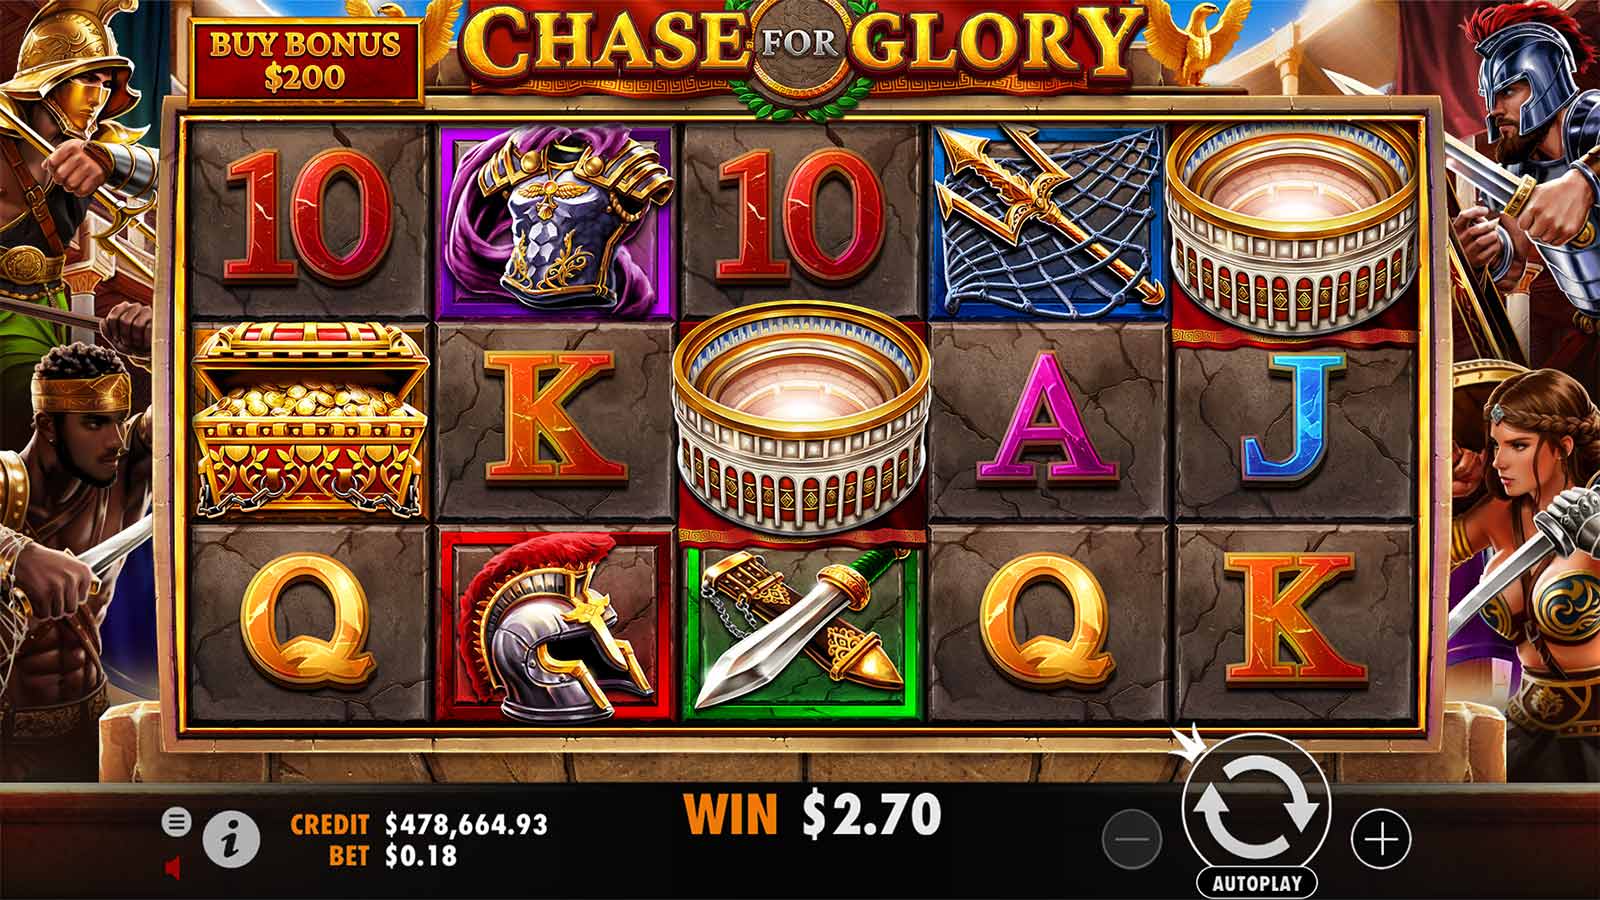 Chase for Glory - LVBet.com